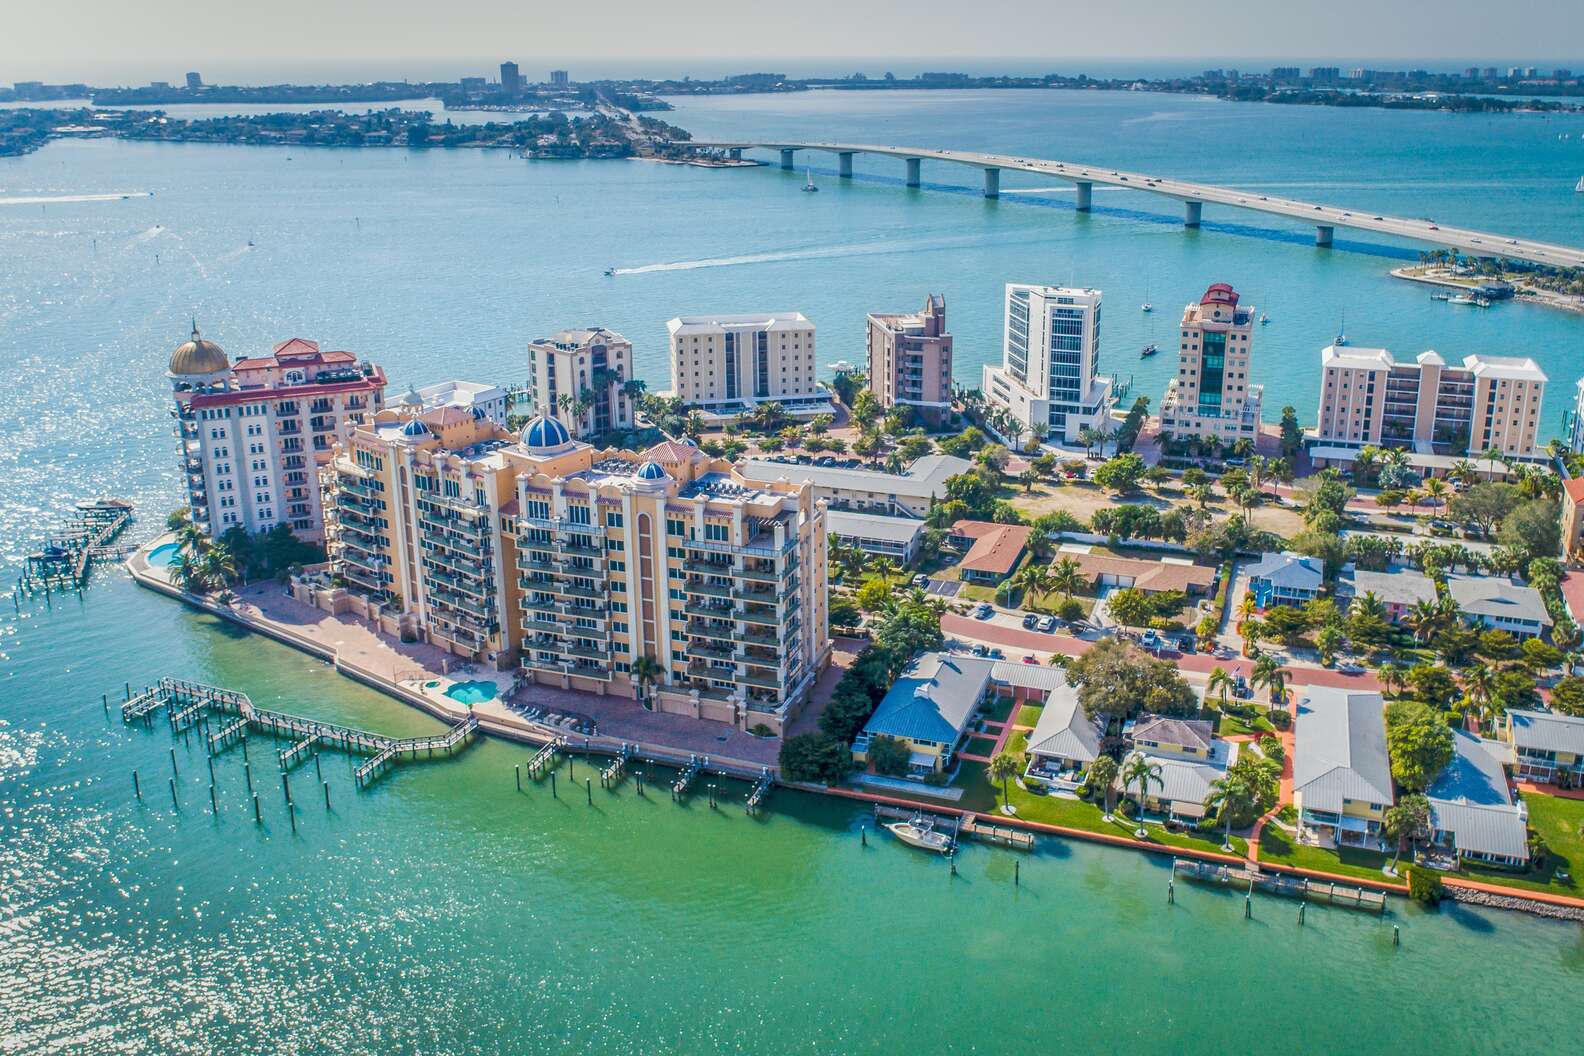 Experience the beauty of Sarasota from above with an aerial shot captured by GreenEdge. Marvel at the stunning landscapes, coastal views, and architectural wonders that make Sarasota truly unique. Our aerial photography showcases the vibrant and diverse beauty of this remarkable city.